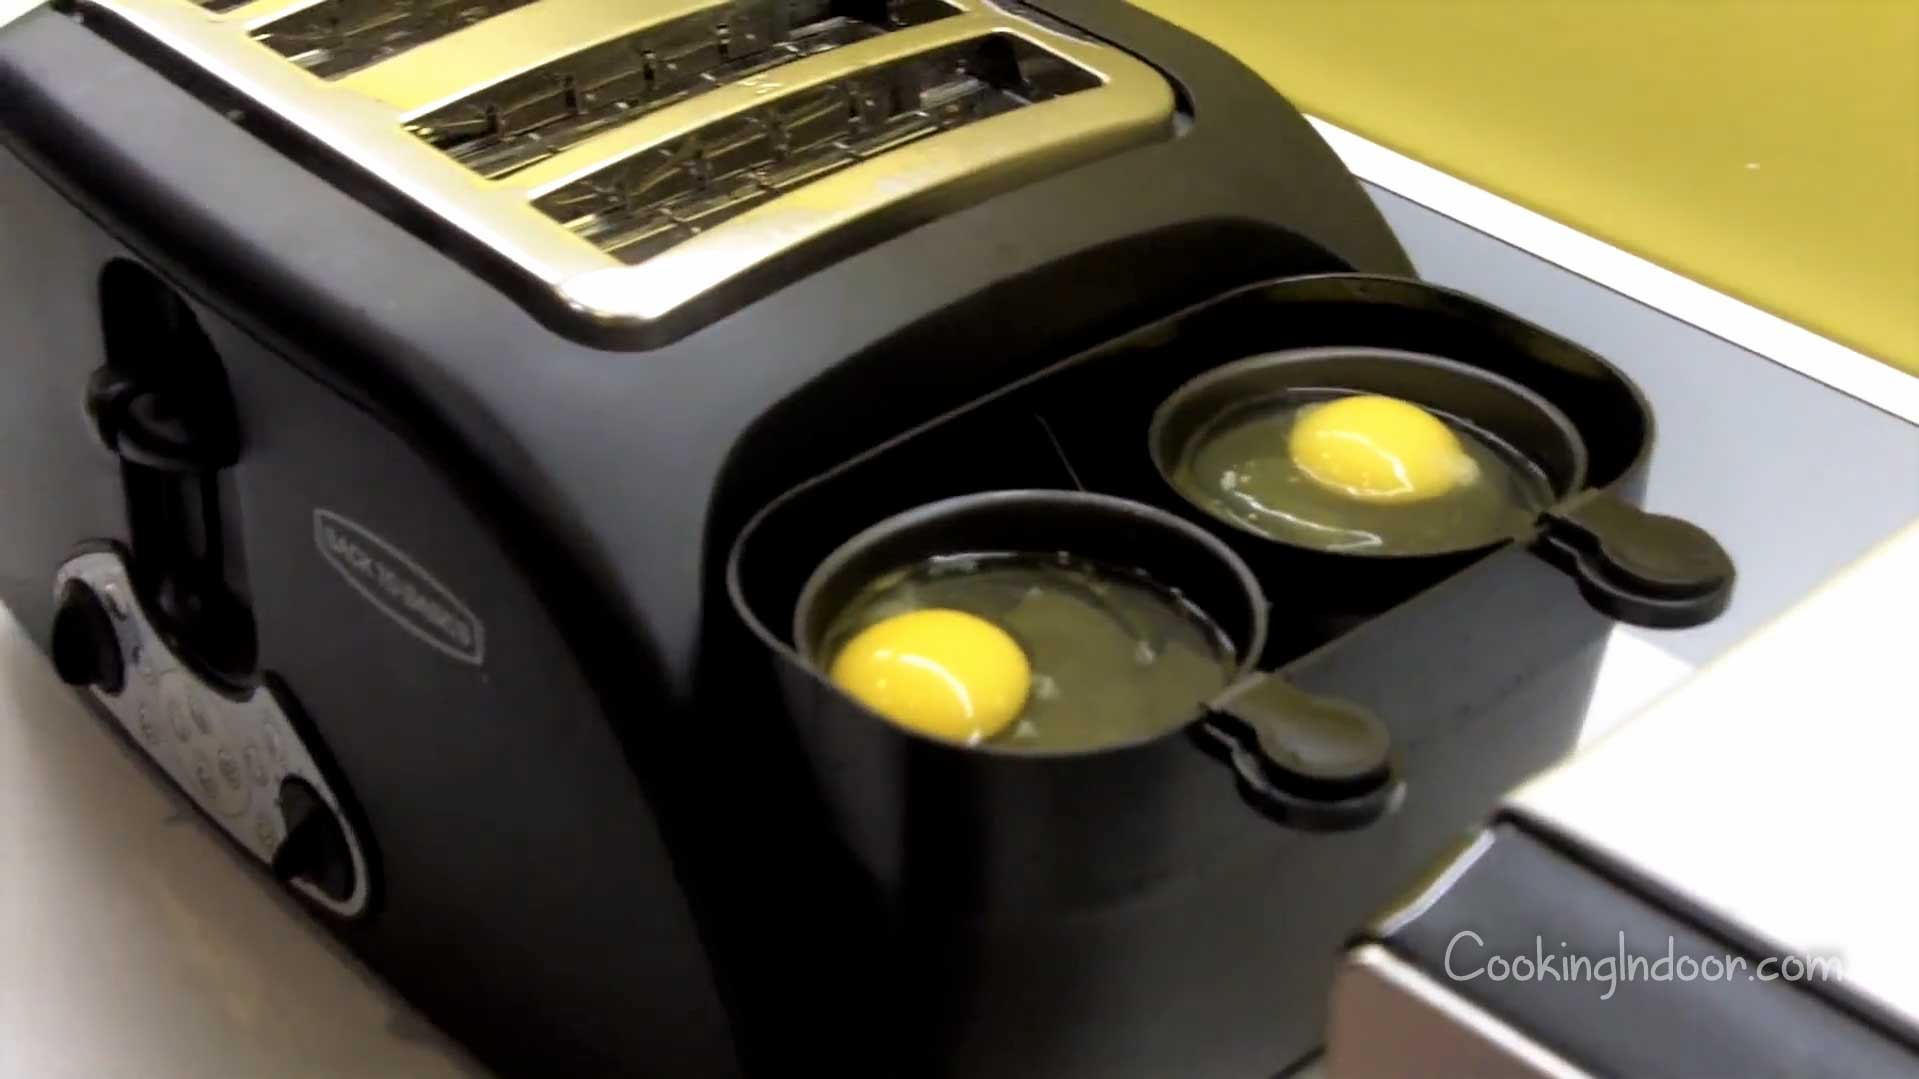 6 Best Toasters With Egg Cooker Recommended by Experts in 2021